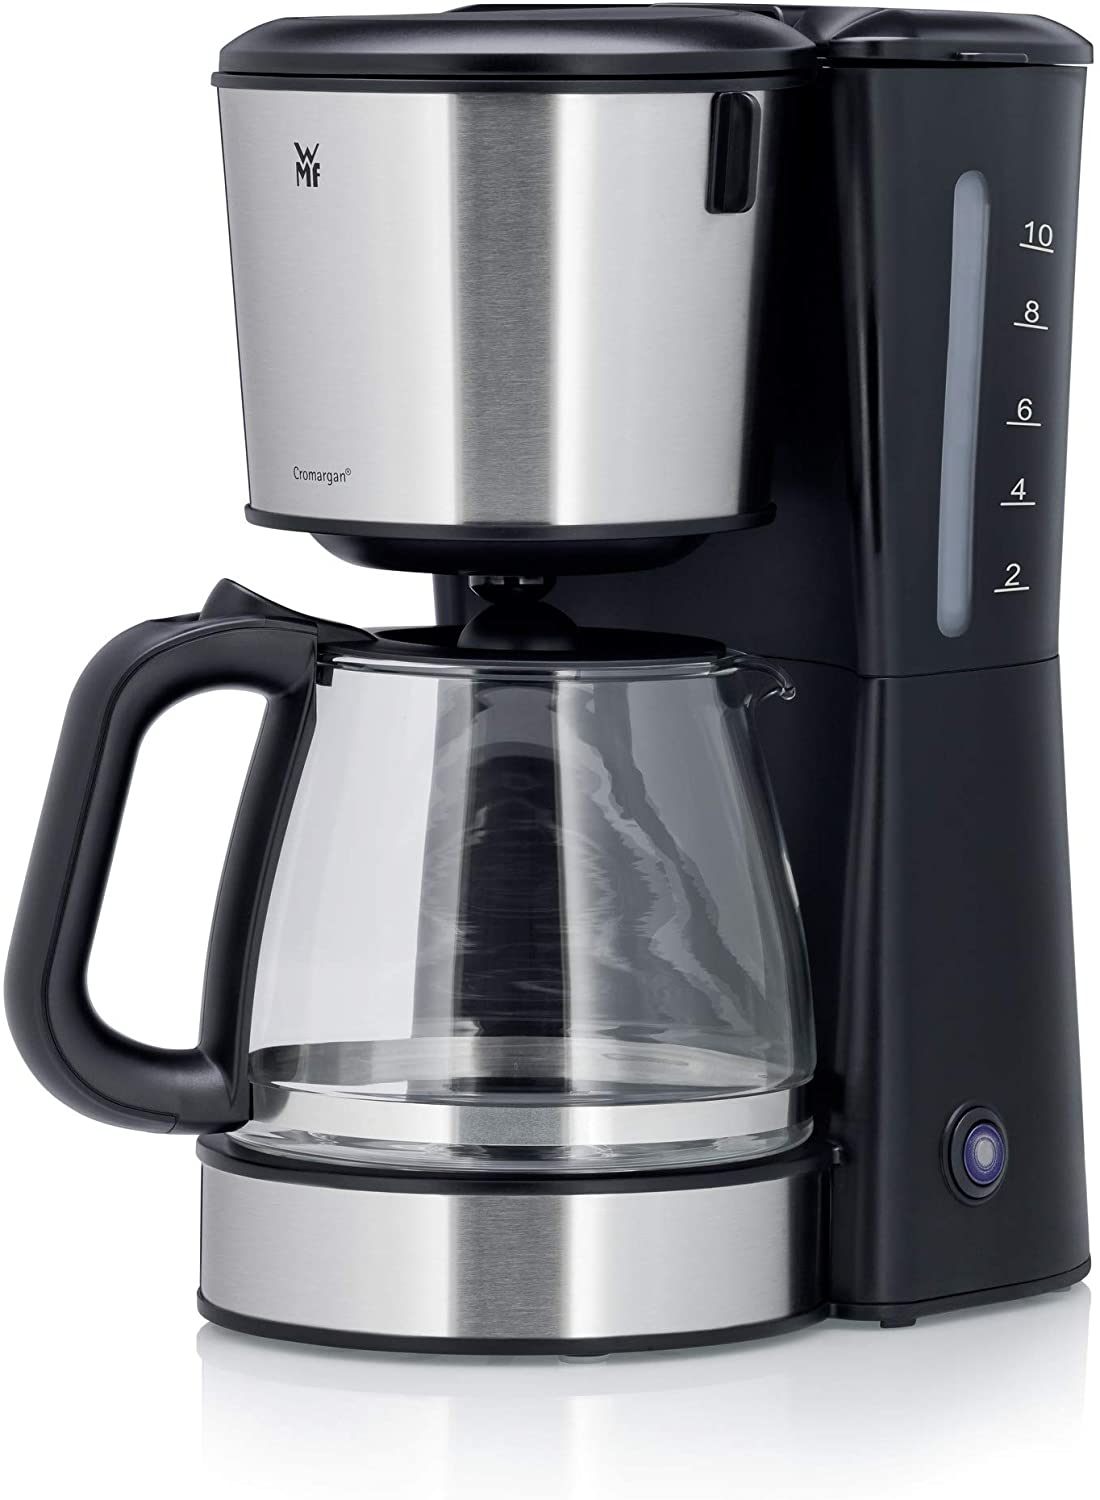 WMF Bueno Pro Coffee Maker with Glass Jug, Filter Coffee, 10 Cups, Start/Stop Button, Drip Stop, Swivel Filter, Automatic Shut-Off, 1000 W